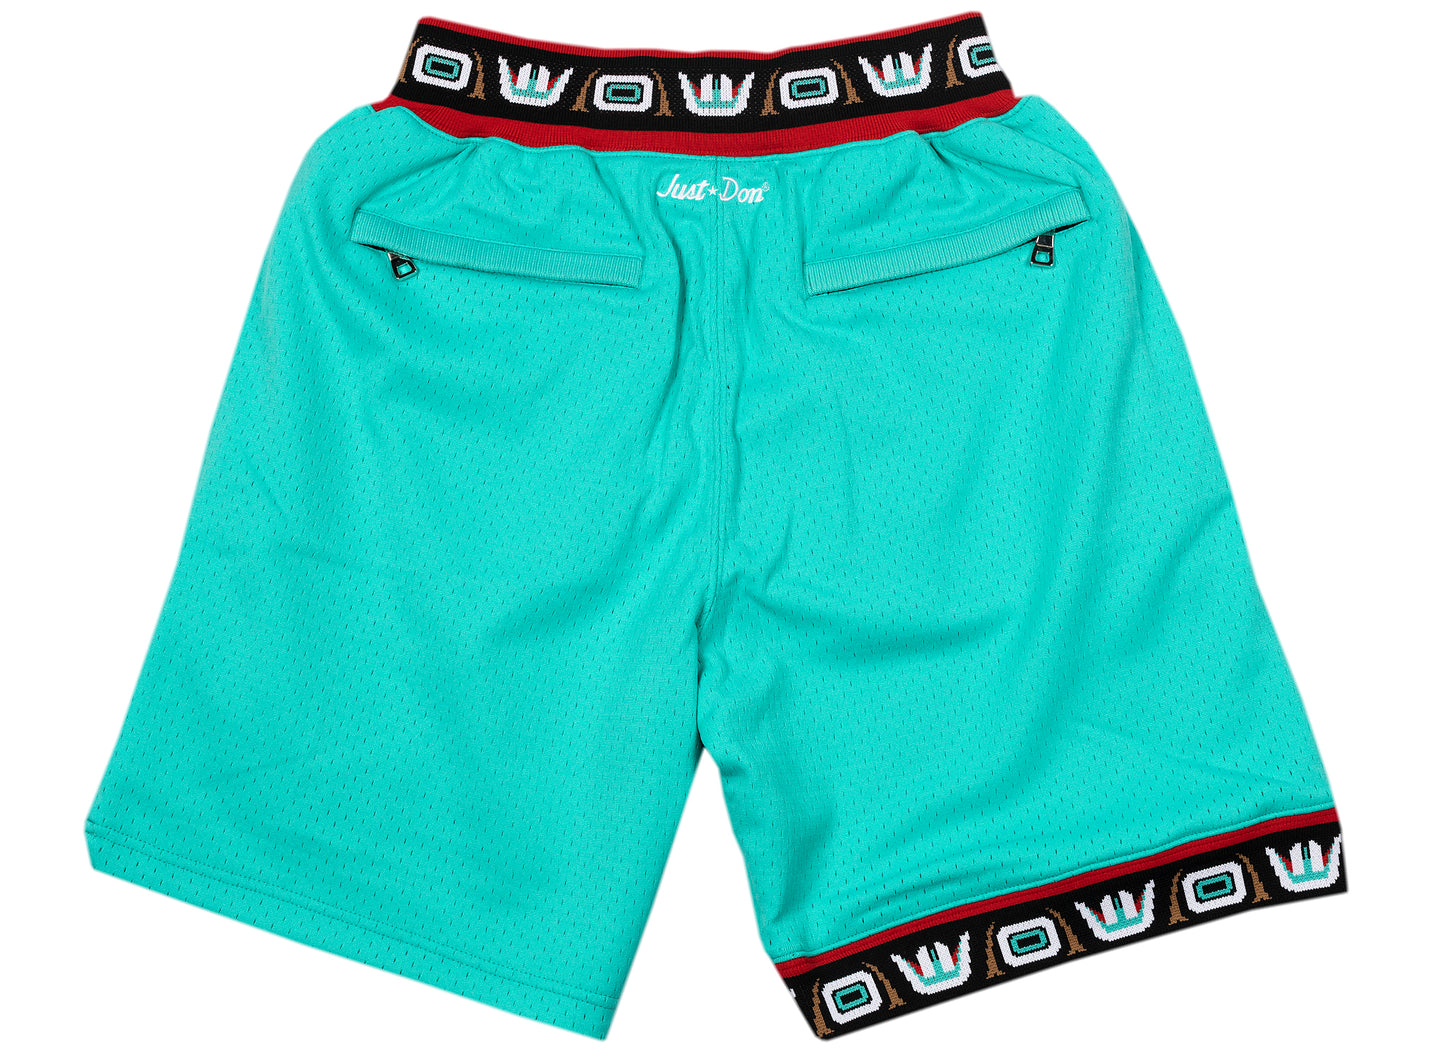 Just Don x Mitchell & Ness 90's Shorts 'Grizzlies 1995'